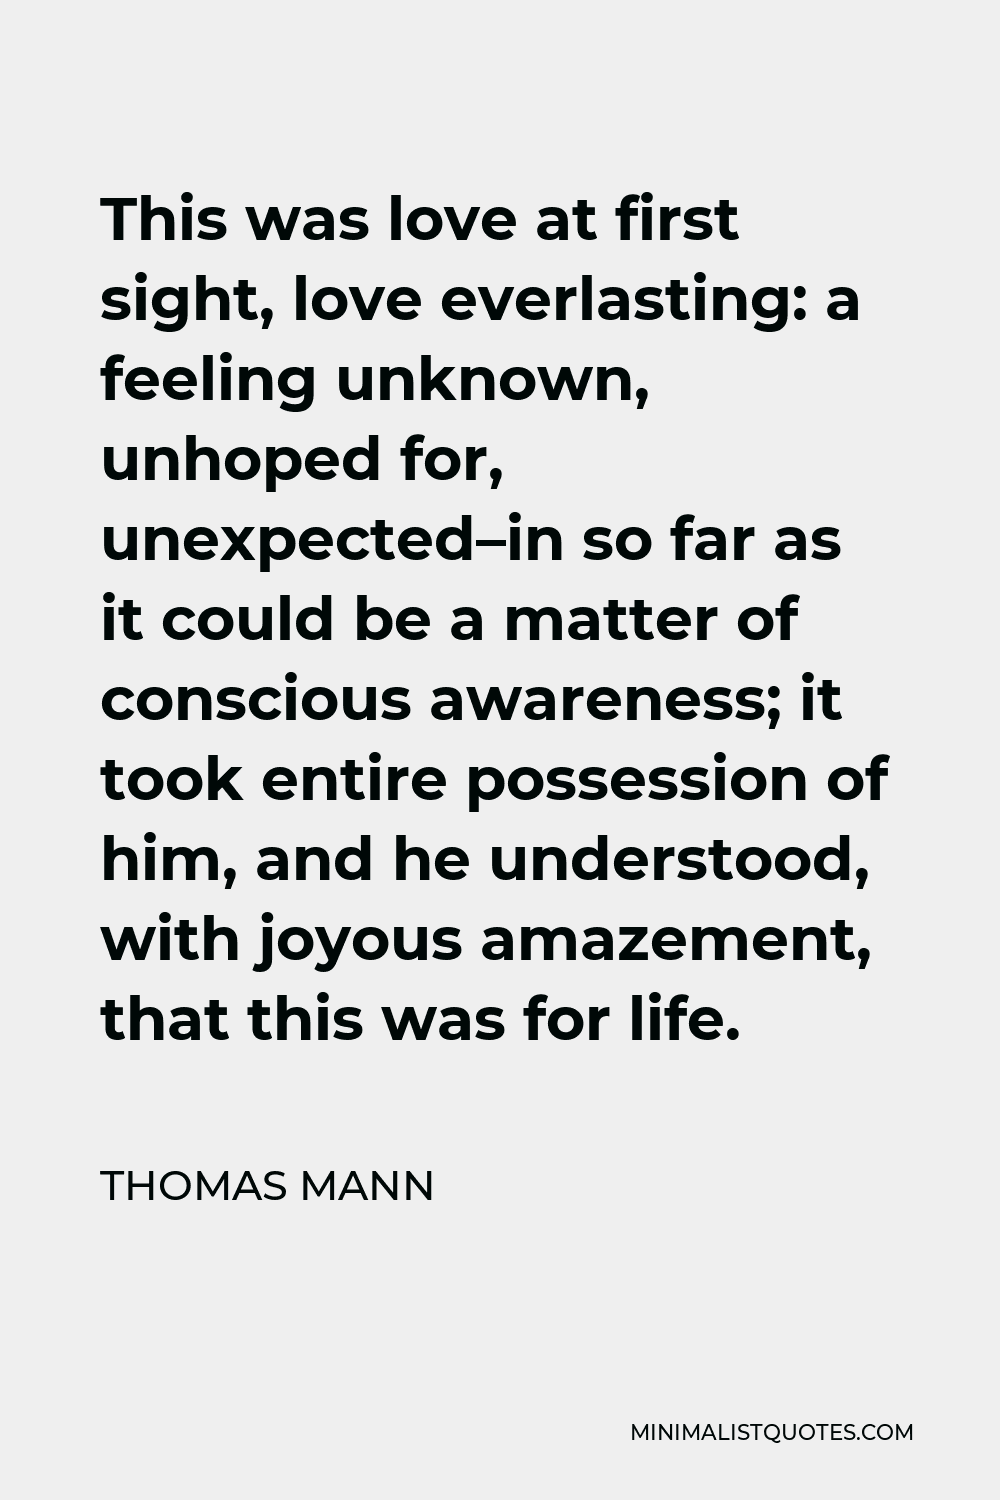 Thomas Mann Quote - This was love at first sight, love everlasting: a feeling unknown, unhoped for, unexpected–in so far as it could be a matter of conscious awareness; it took entire possession of him, and he understood, with joyous amazement, that this was for life.